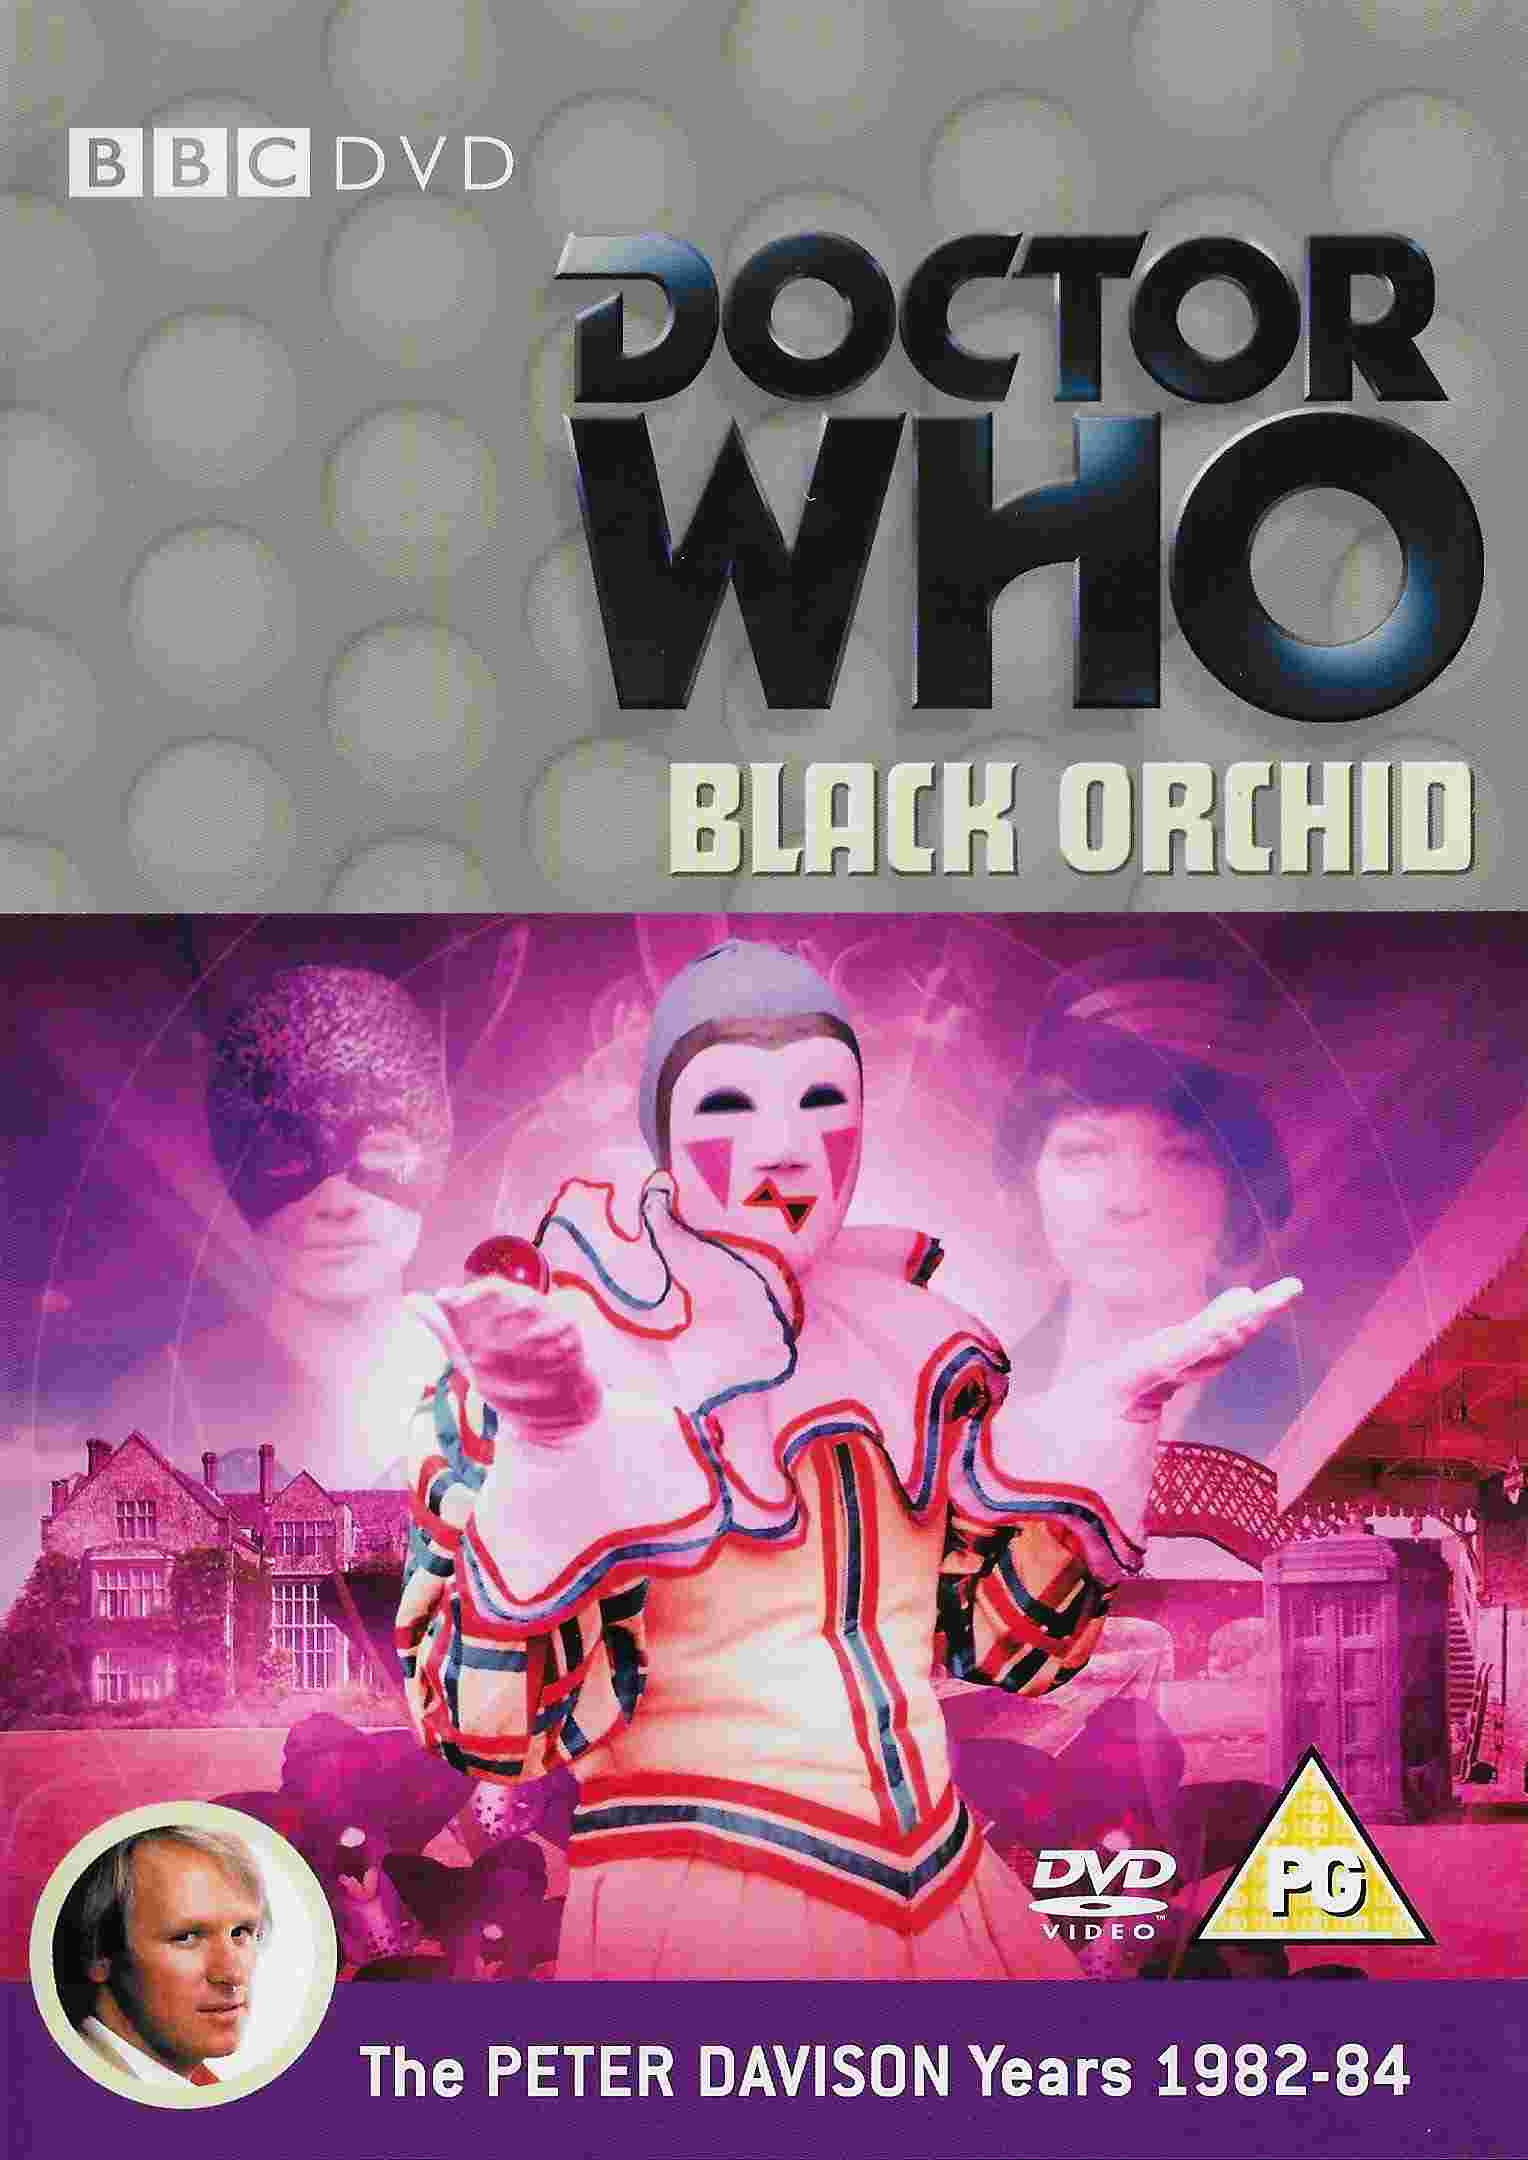 Picture of BBCDVD 2432 Doctor Who - Black Orchid by artist Terence Dudley from the BBC dvds - Records and Tapes library